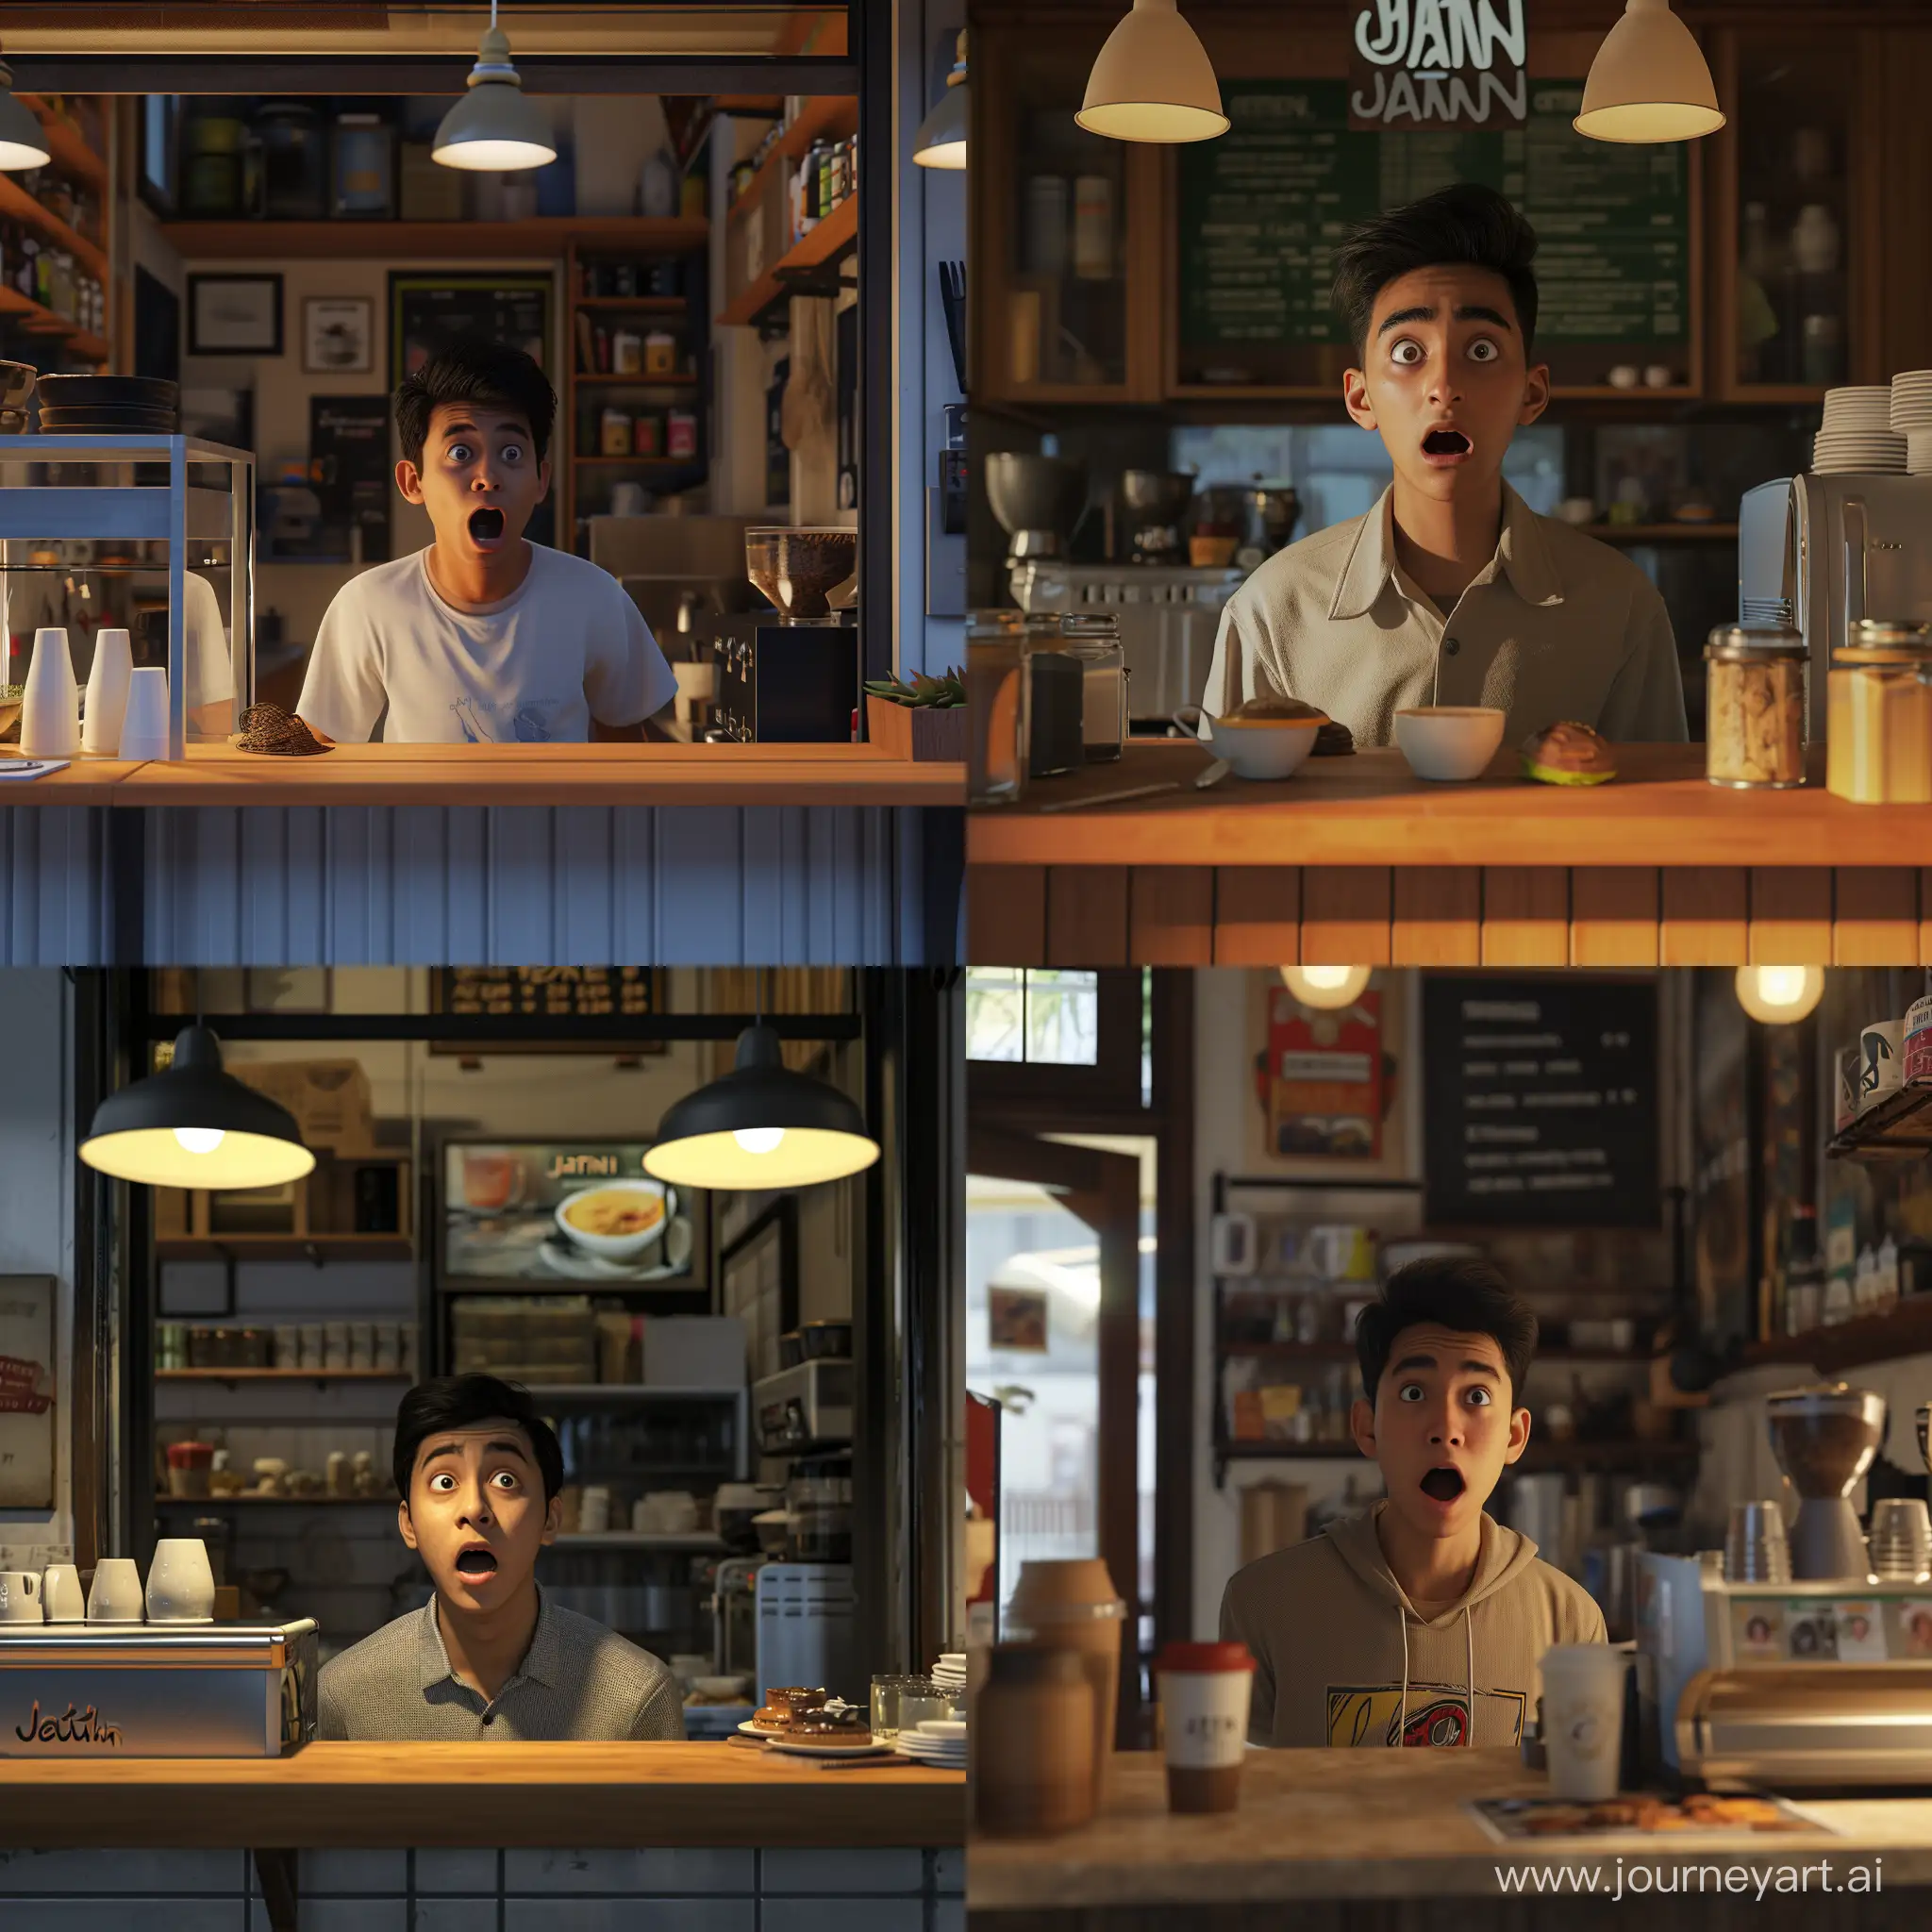 [Depict a medium shot of Jatin, a young man with an ordinary appearance, standing behind the counter of a small café. Show him looking surprised and intrigued as he gazes at something off-screen. Convey his curiosity and anticipation] unreal engine, hyper real --